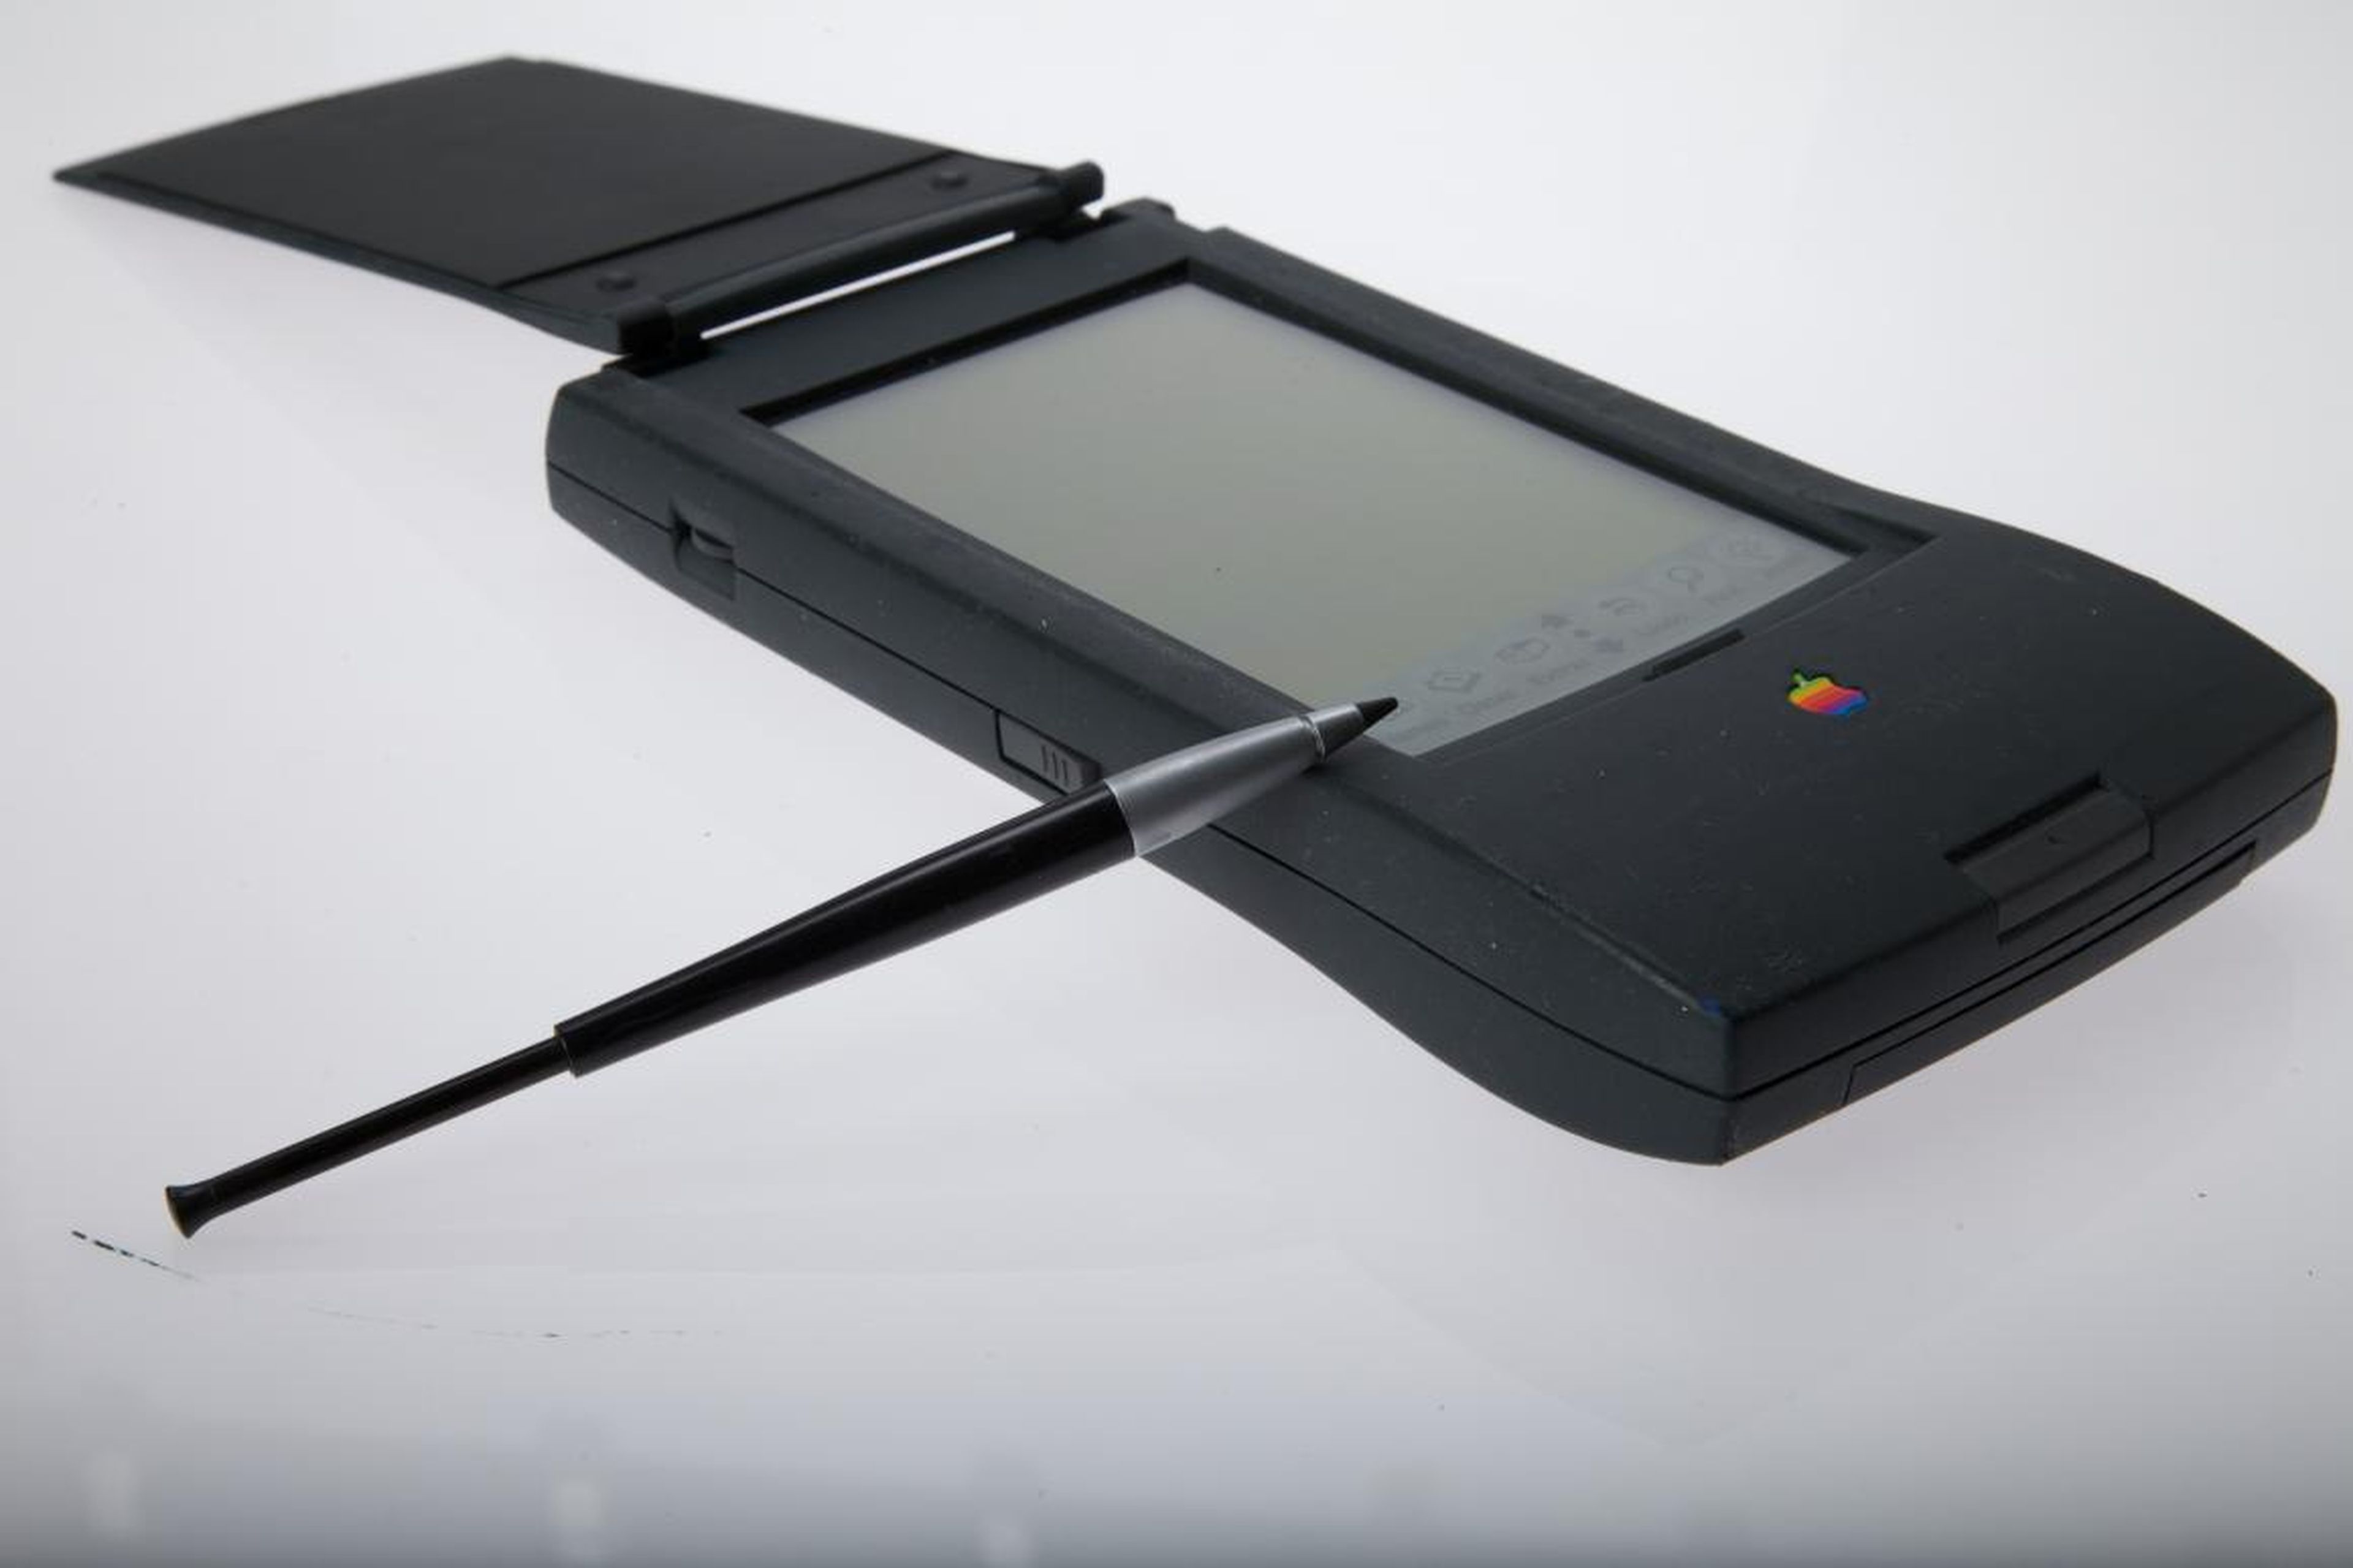 Ive's first design for Apple was the MessagePad 110, part of its Newton line of pioneering personal digital assistants. These devices were innovative, boasting stylus input and other cutting-edge features, but they were never